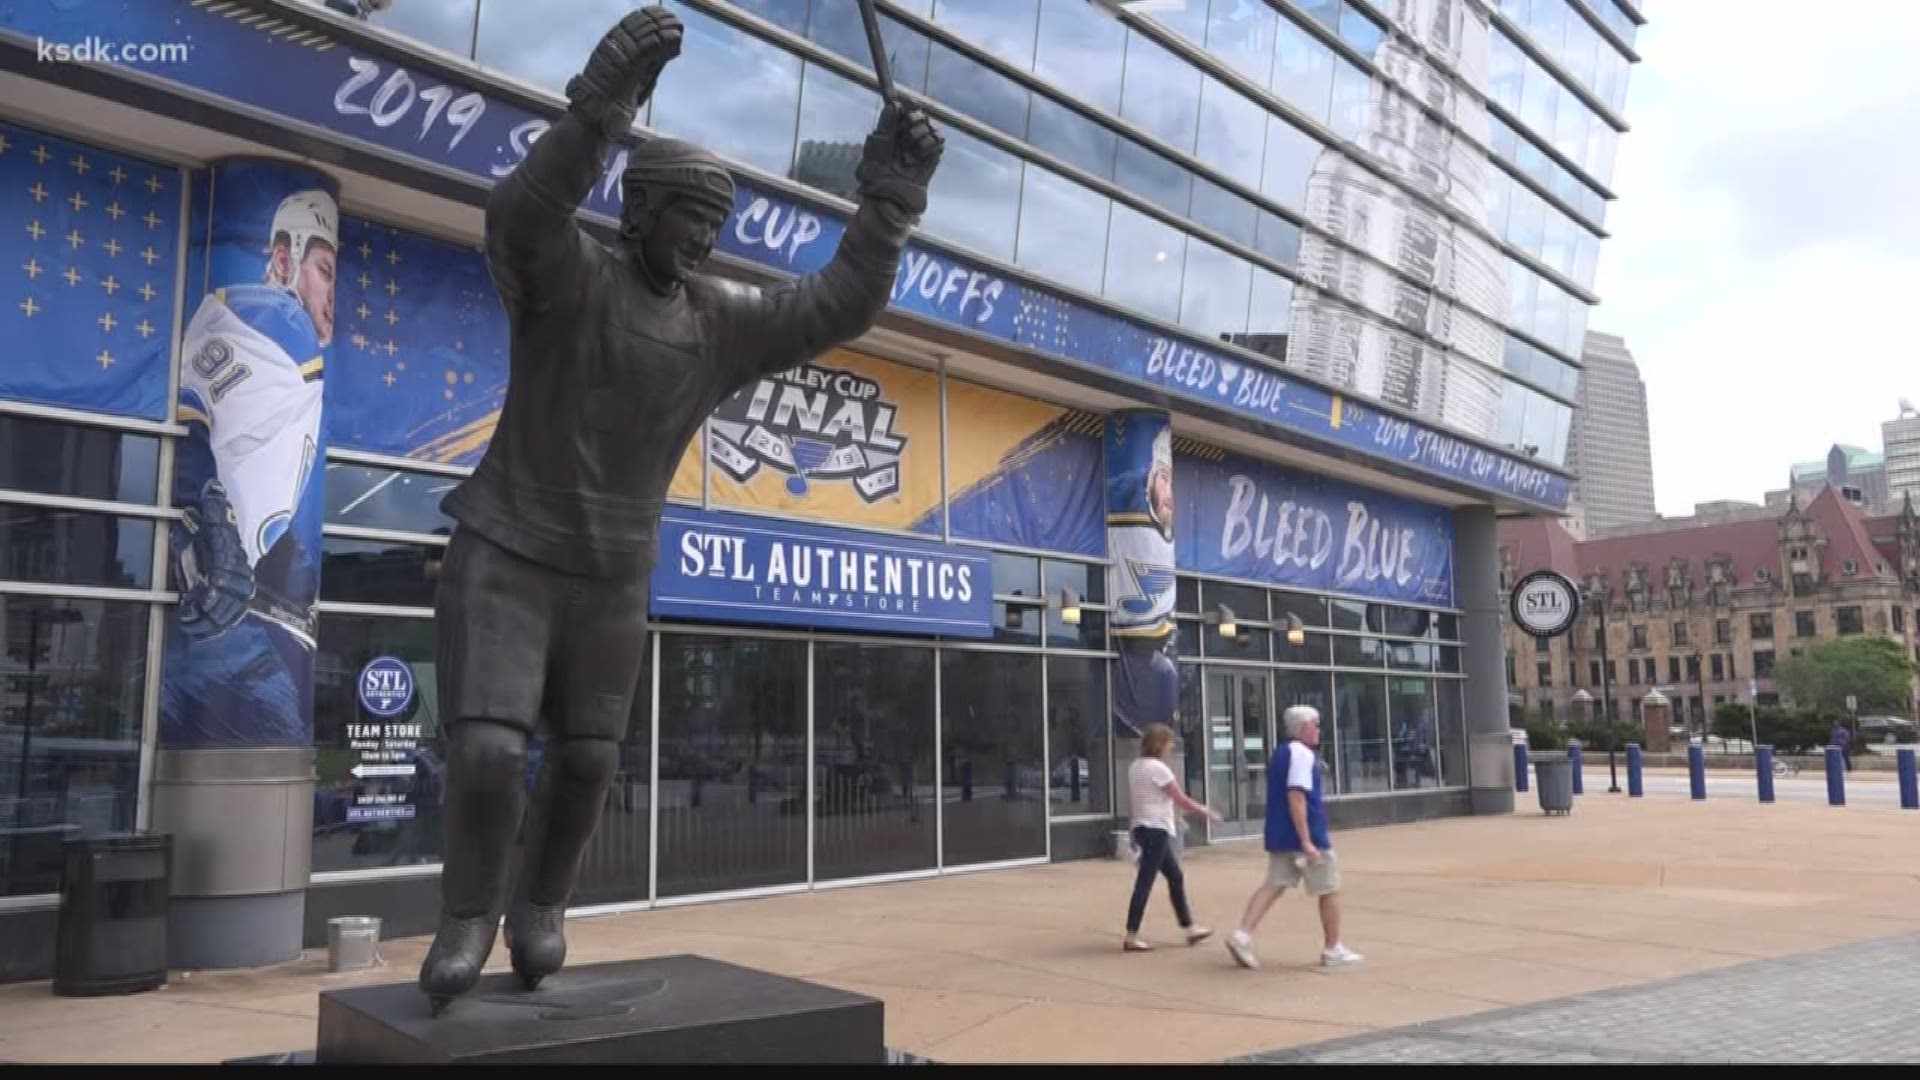 Stanley Cup Final Game 6 is &quot;most expensive ticket in St. Louis sports history&quot; | mediakits.theygsgroup.com